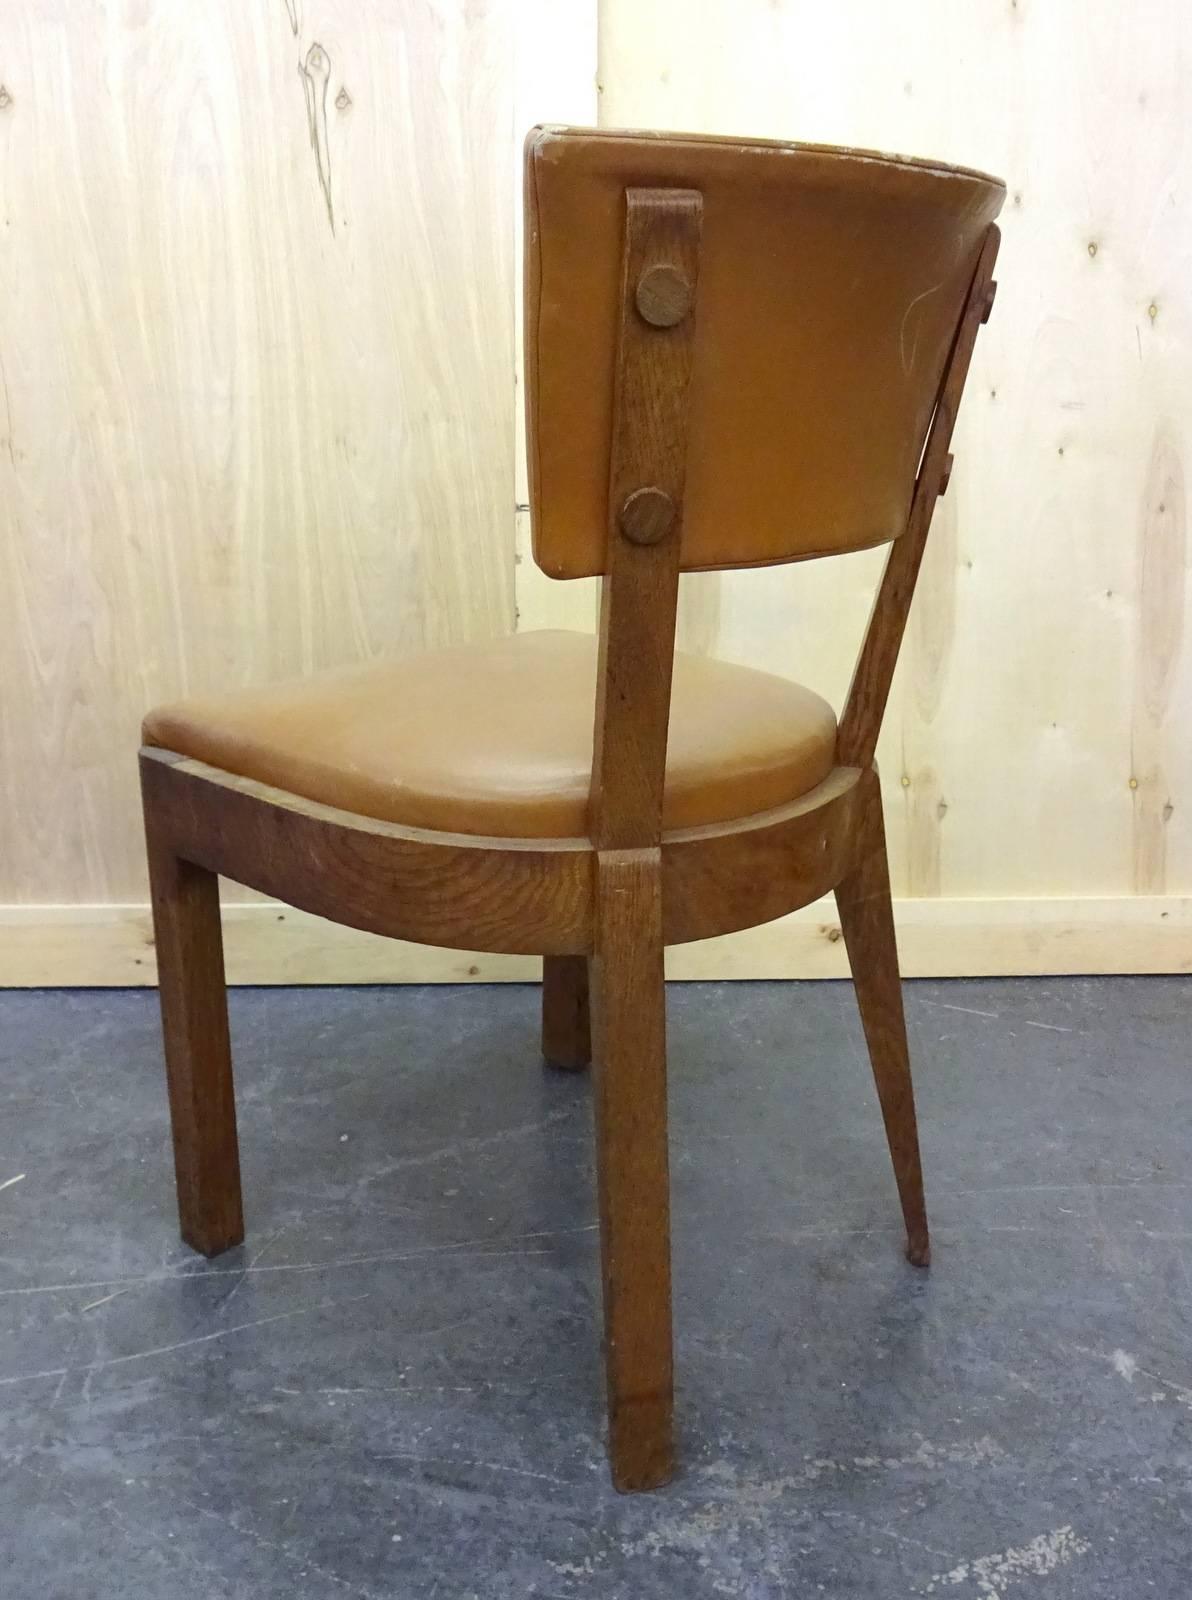 Chairs in original condition from the 1940s, leather in good vintage condition.
Two similar chairs available with velvet upholstery if you'd like a set of eight 
Located in Brooklyn